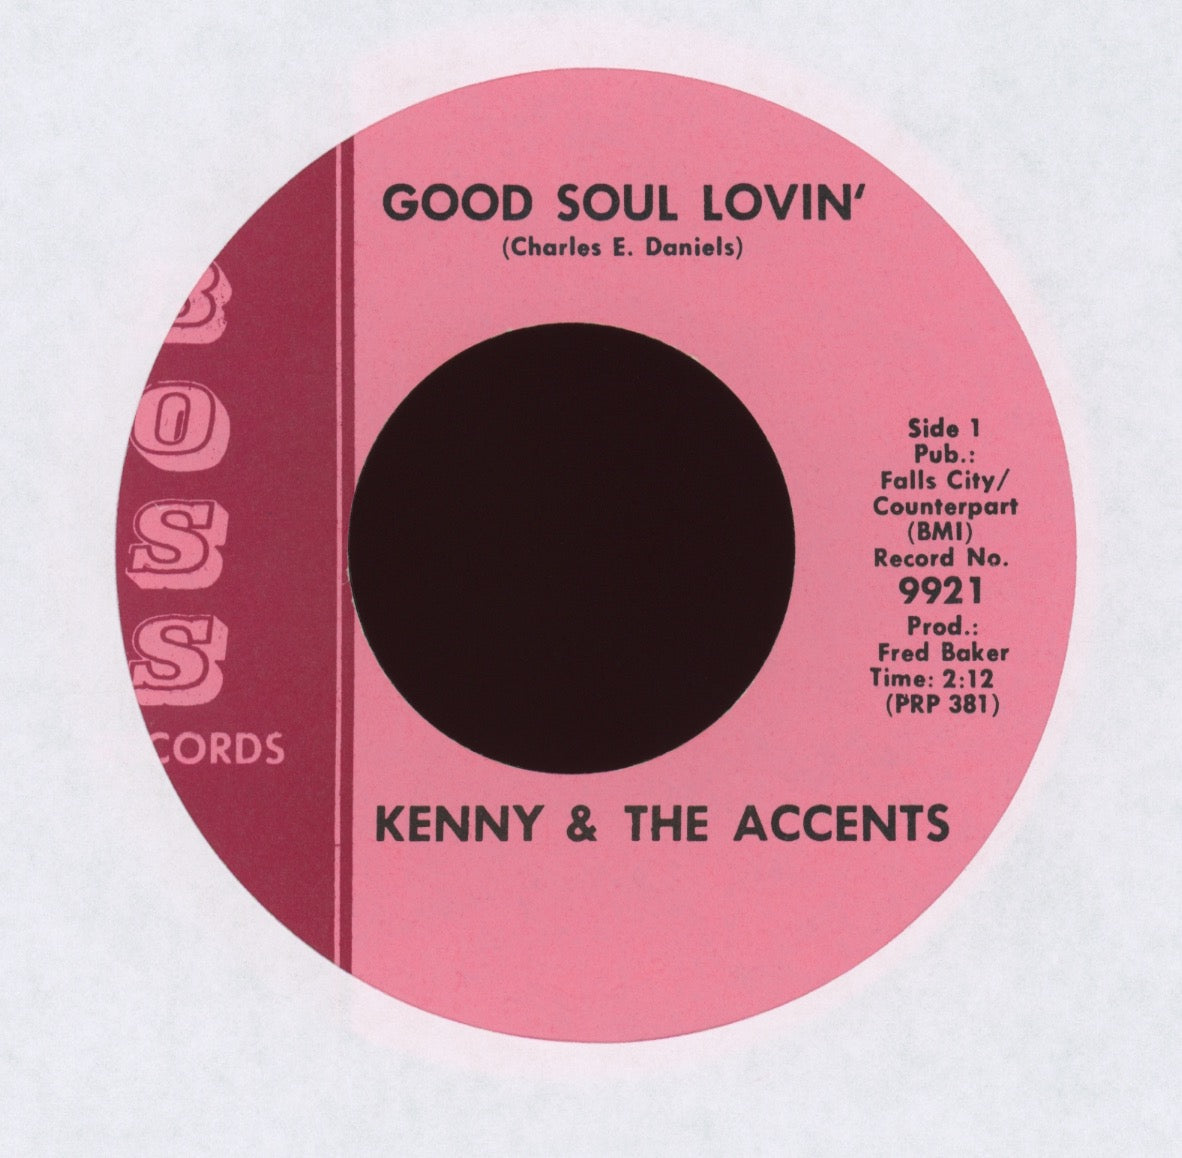 Kenny & The Accent Revue - Good Soul Lovin' on Boss